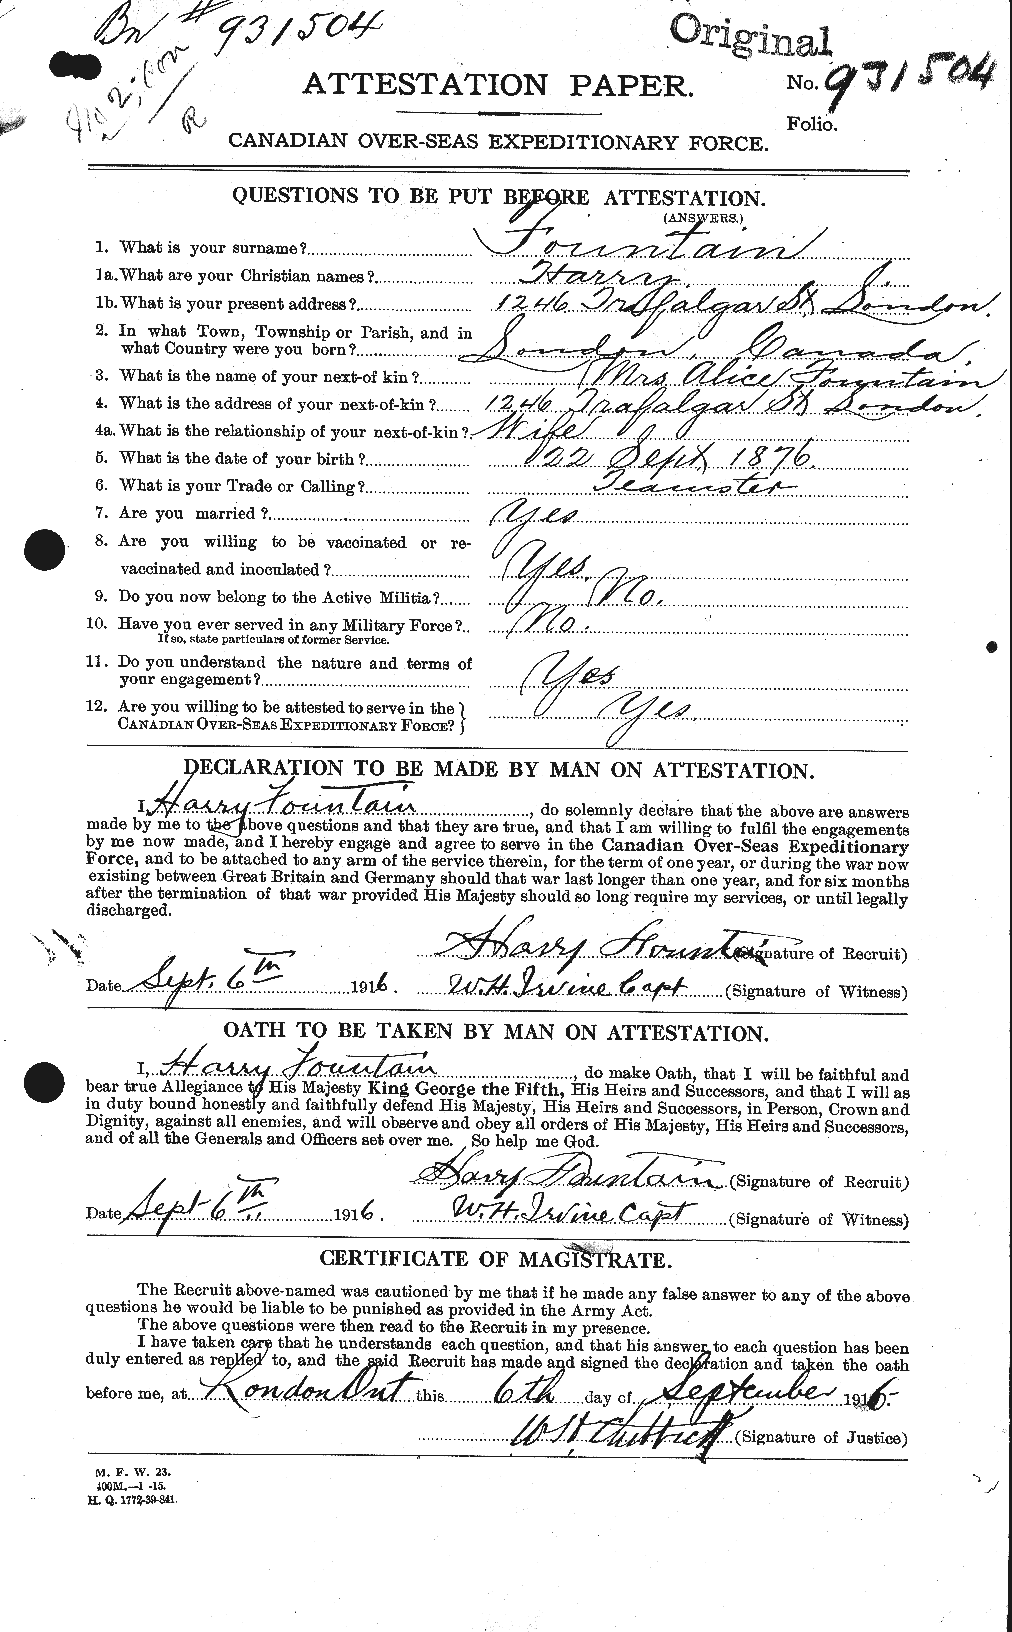 Personnel Records of the First World War - CEF 330973a